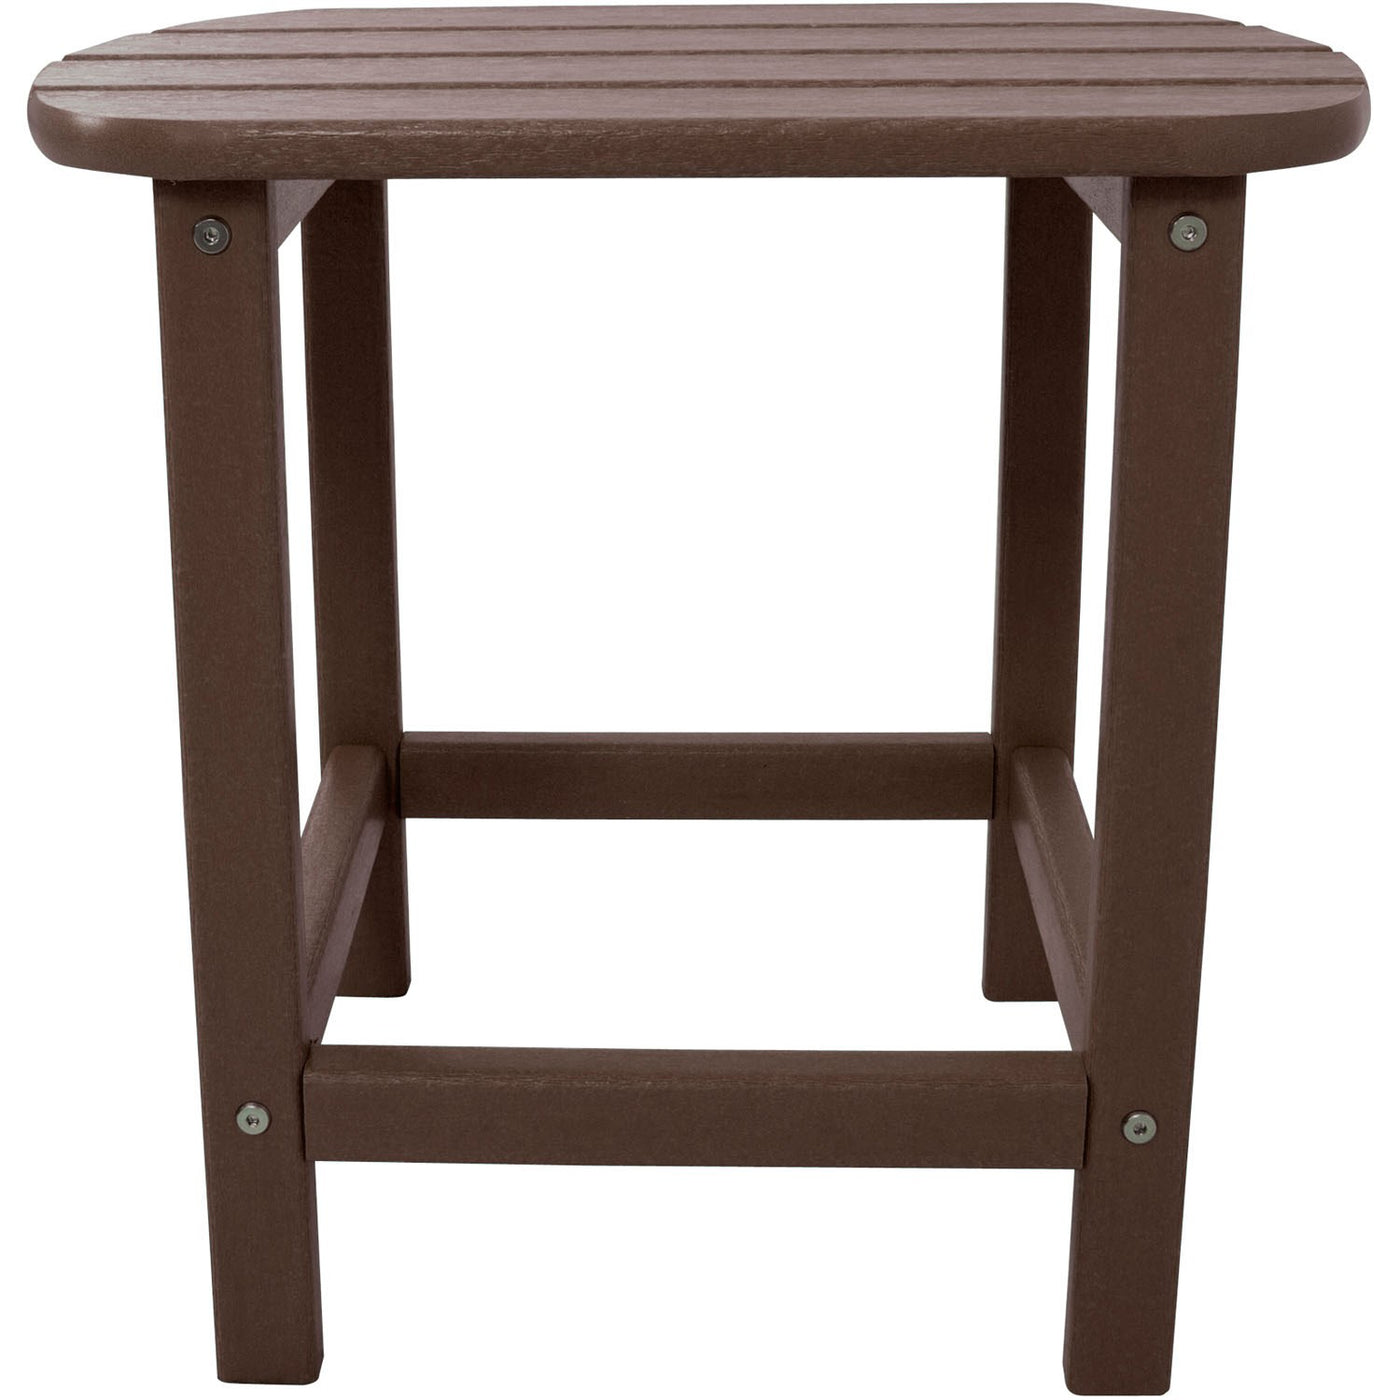 Hanover All-Weather 19"x15" Side Table - Mahogany - GreenLivingSupply-Store